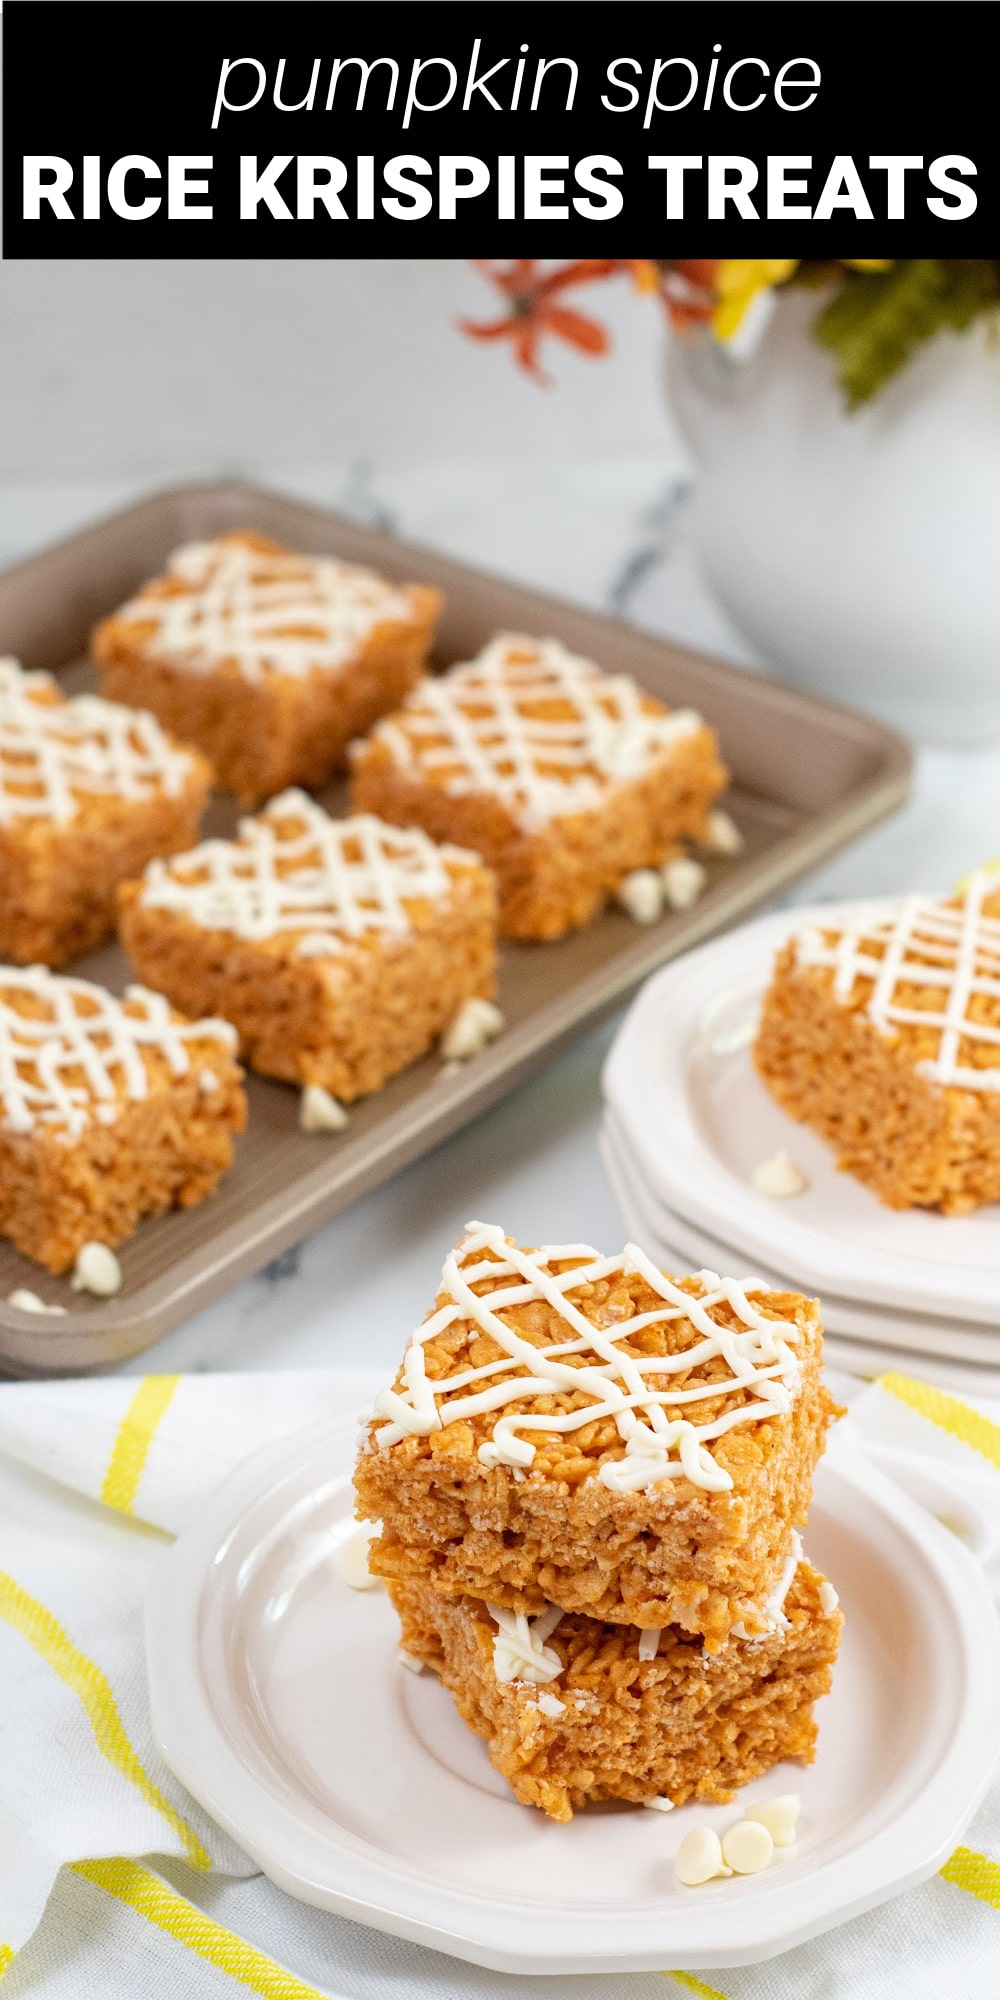 These Pumpkin Spice Rice Krispie treats are a fun way to dress up a classic dessert for pumpkin season. Crisp and chewy, filled with sweet pumpkin pie spice flavor and topped with a white chocolate drizzle, these pumpkin treats are as easy as the classic Rice Krispie treats, but even more delicious.